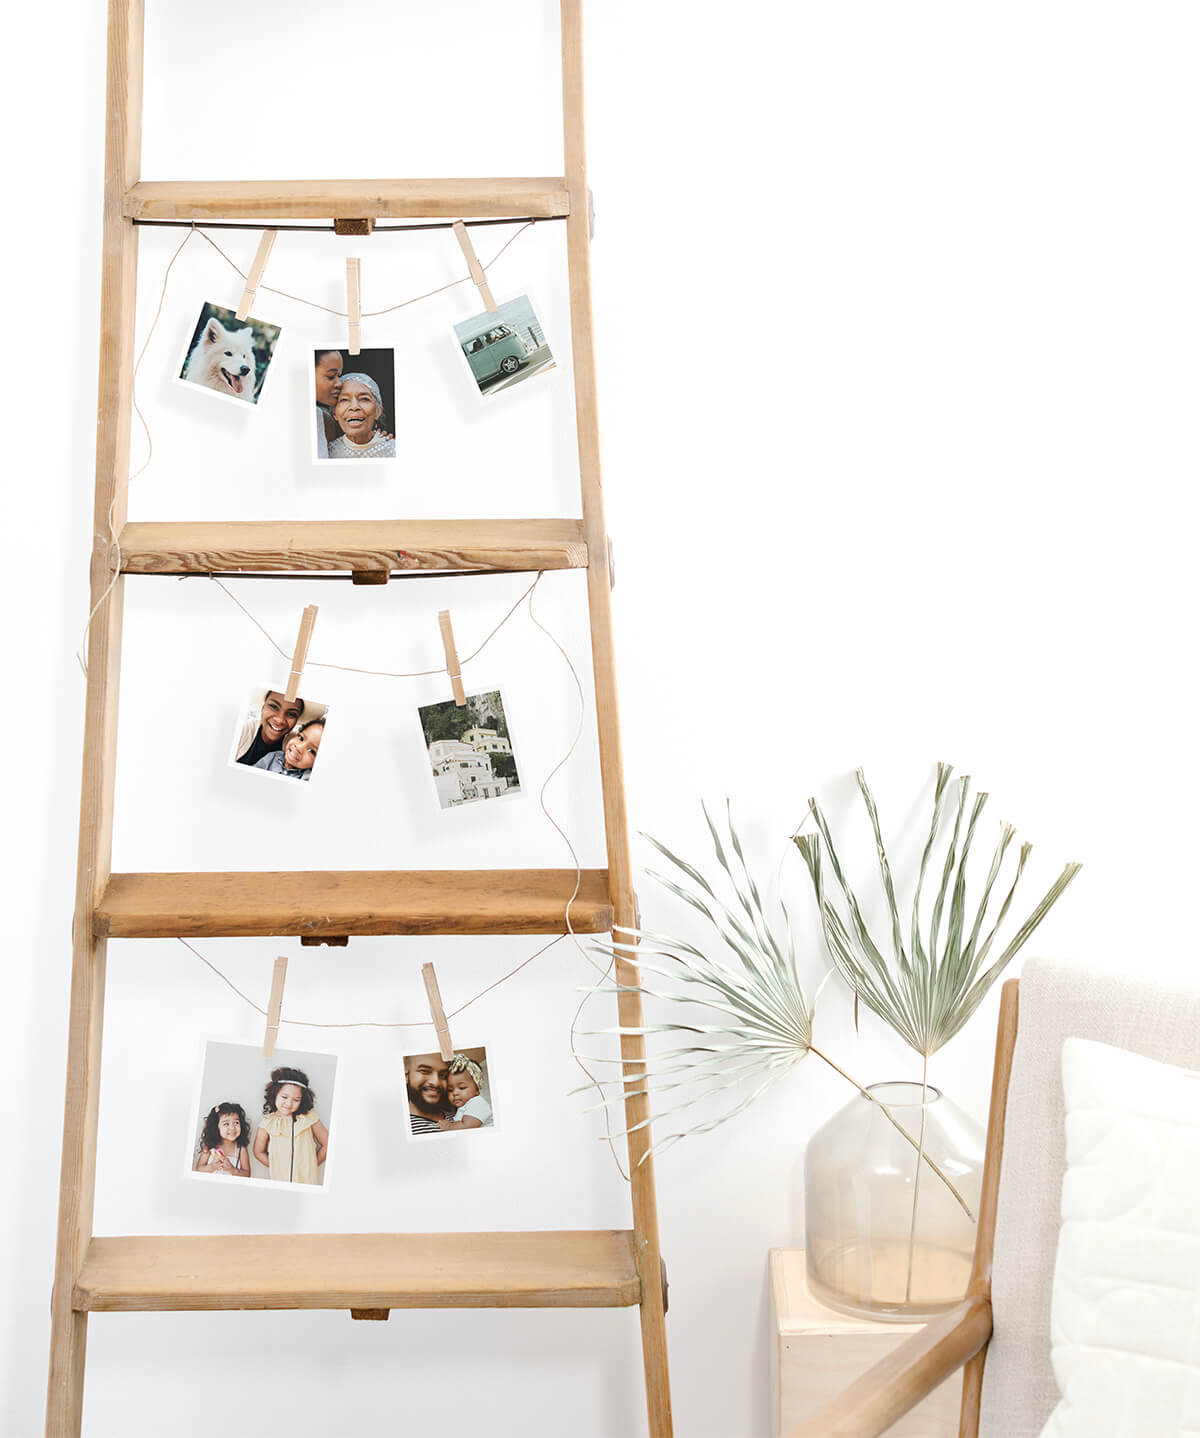 Wooden ladder repurposed for creative photo display